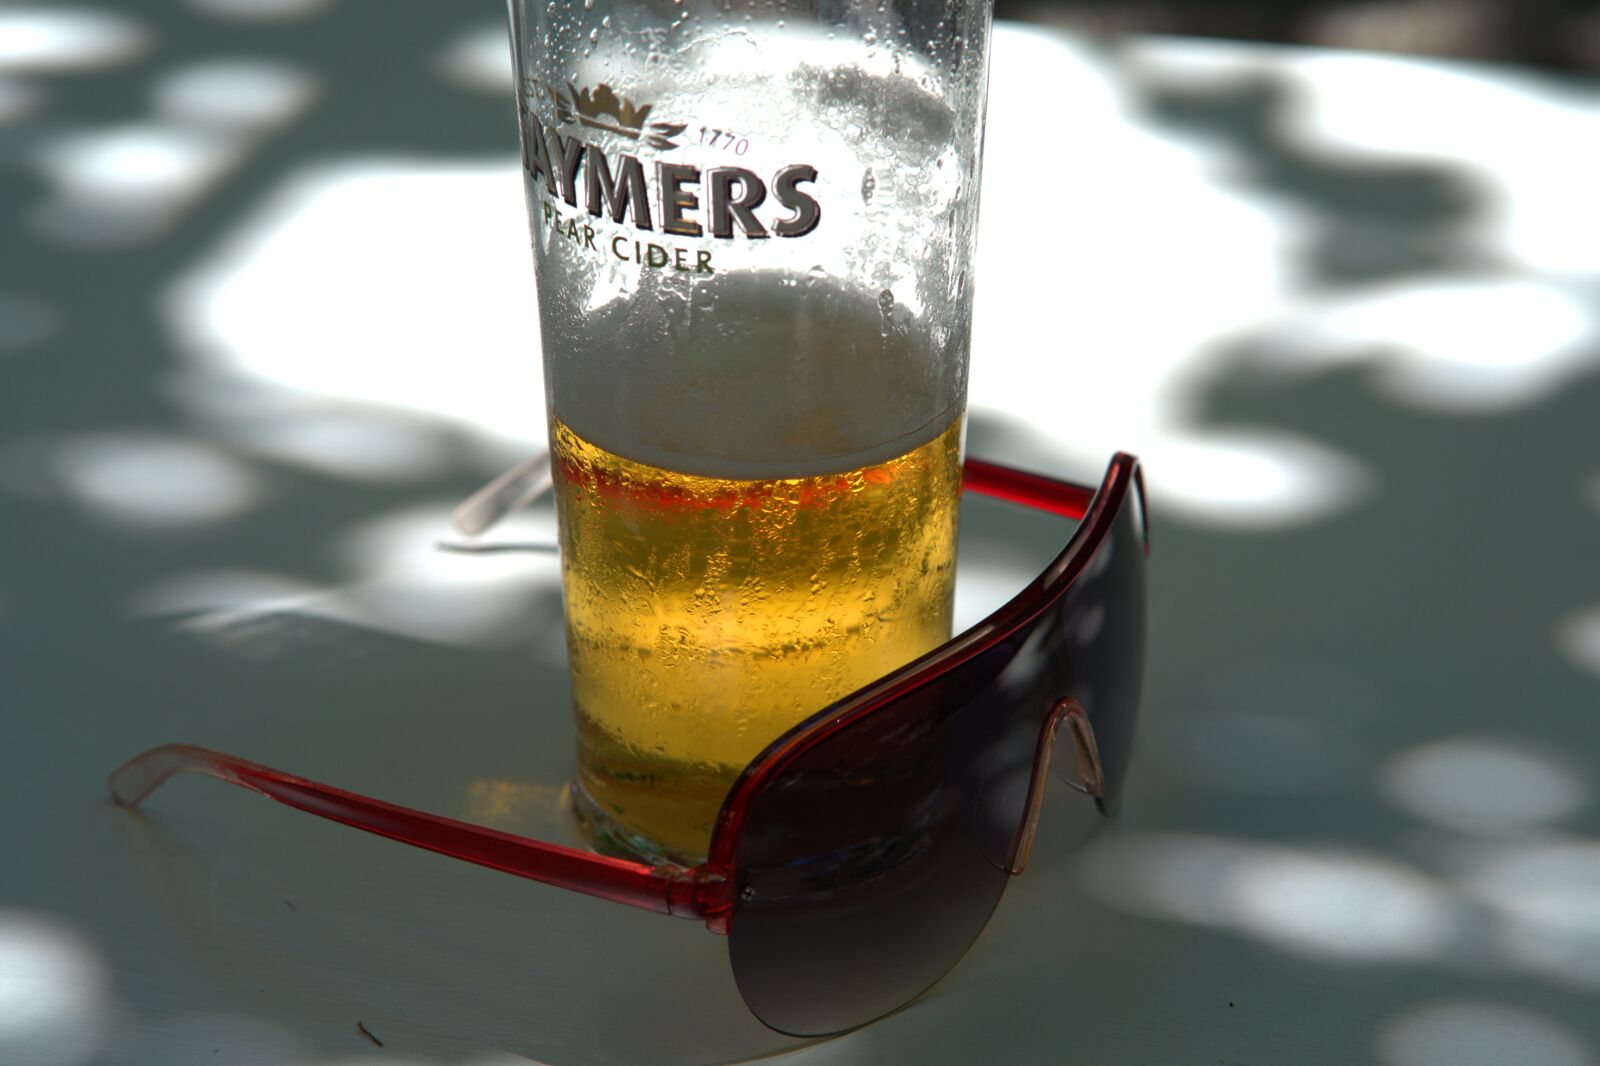 Sony a7 II sample photo. Sunglasses, beer, beer glass photography